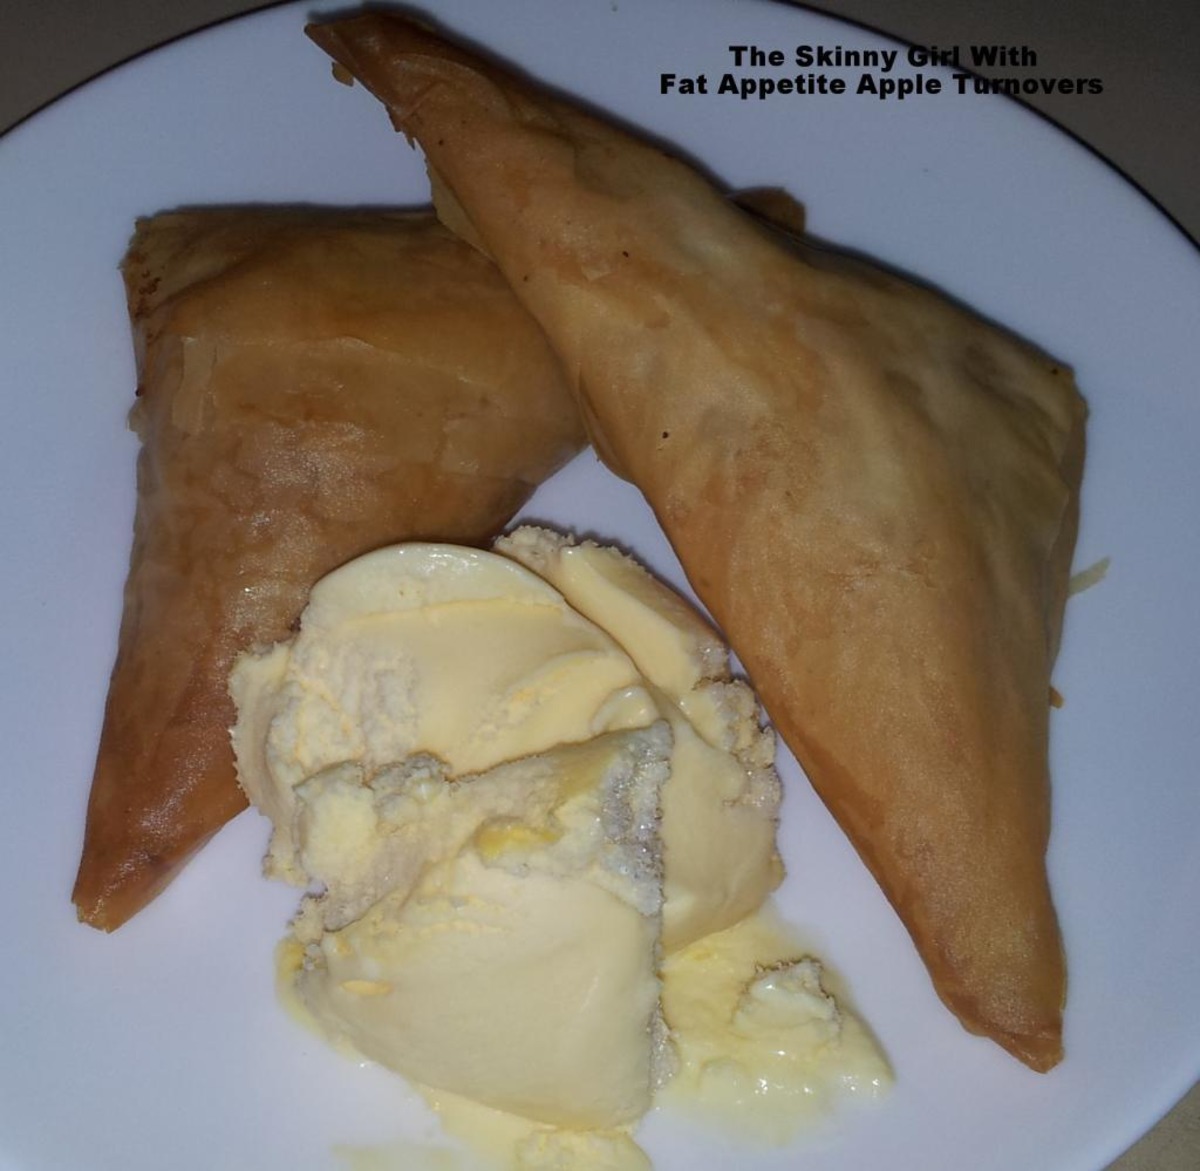 The Skinny Girl With Fat Appetite Apple Turnovers image